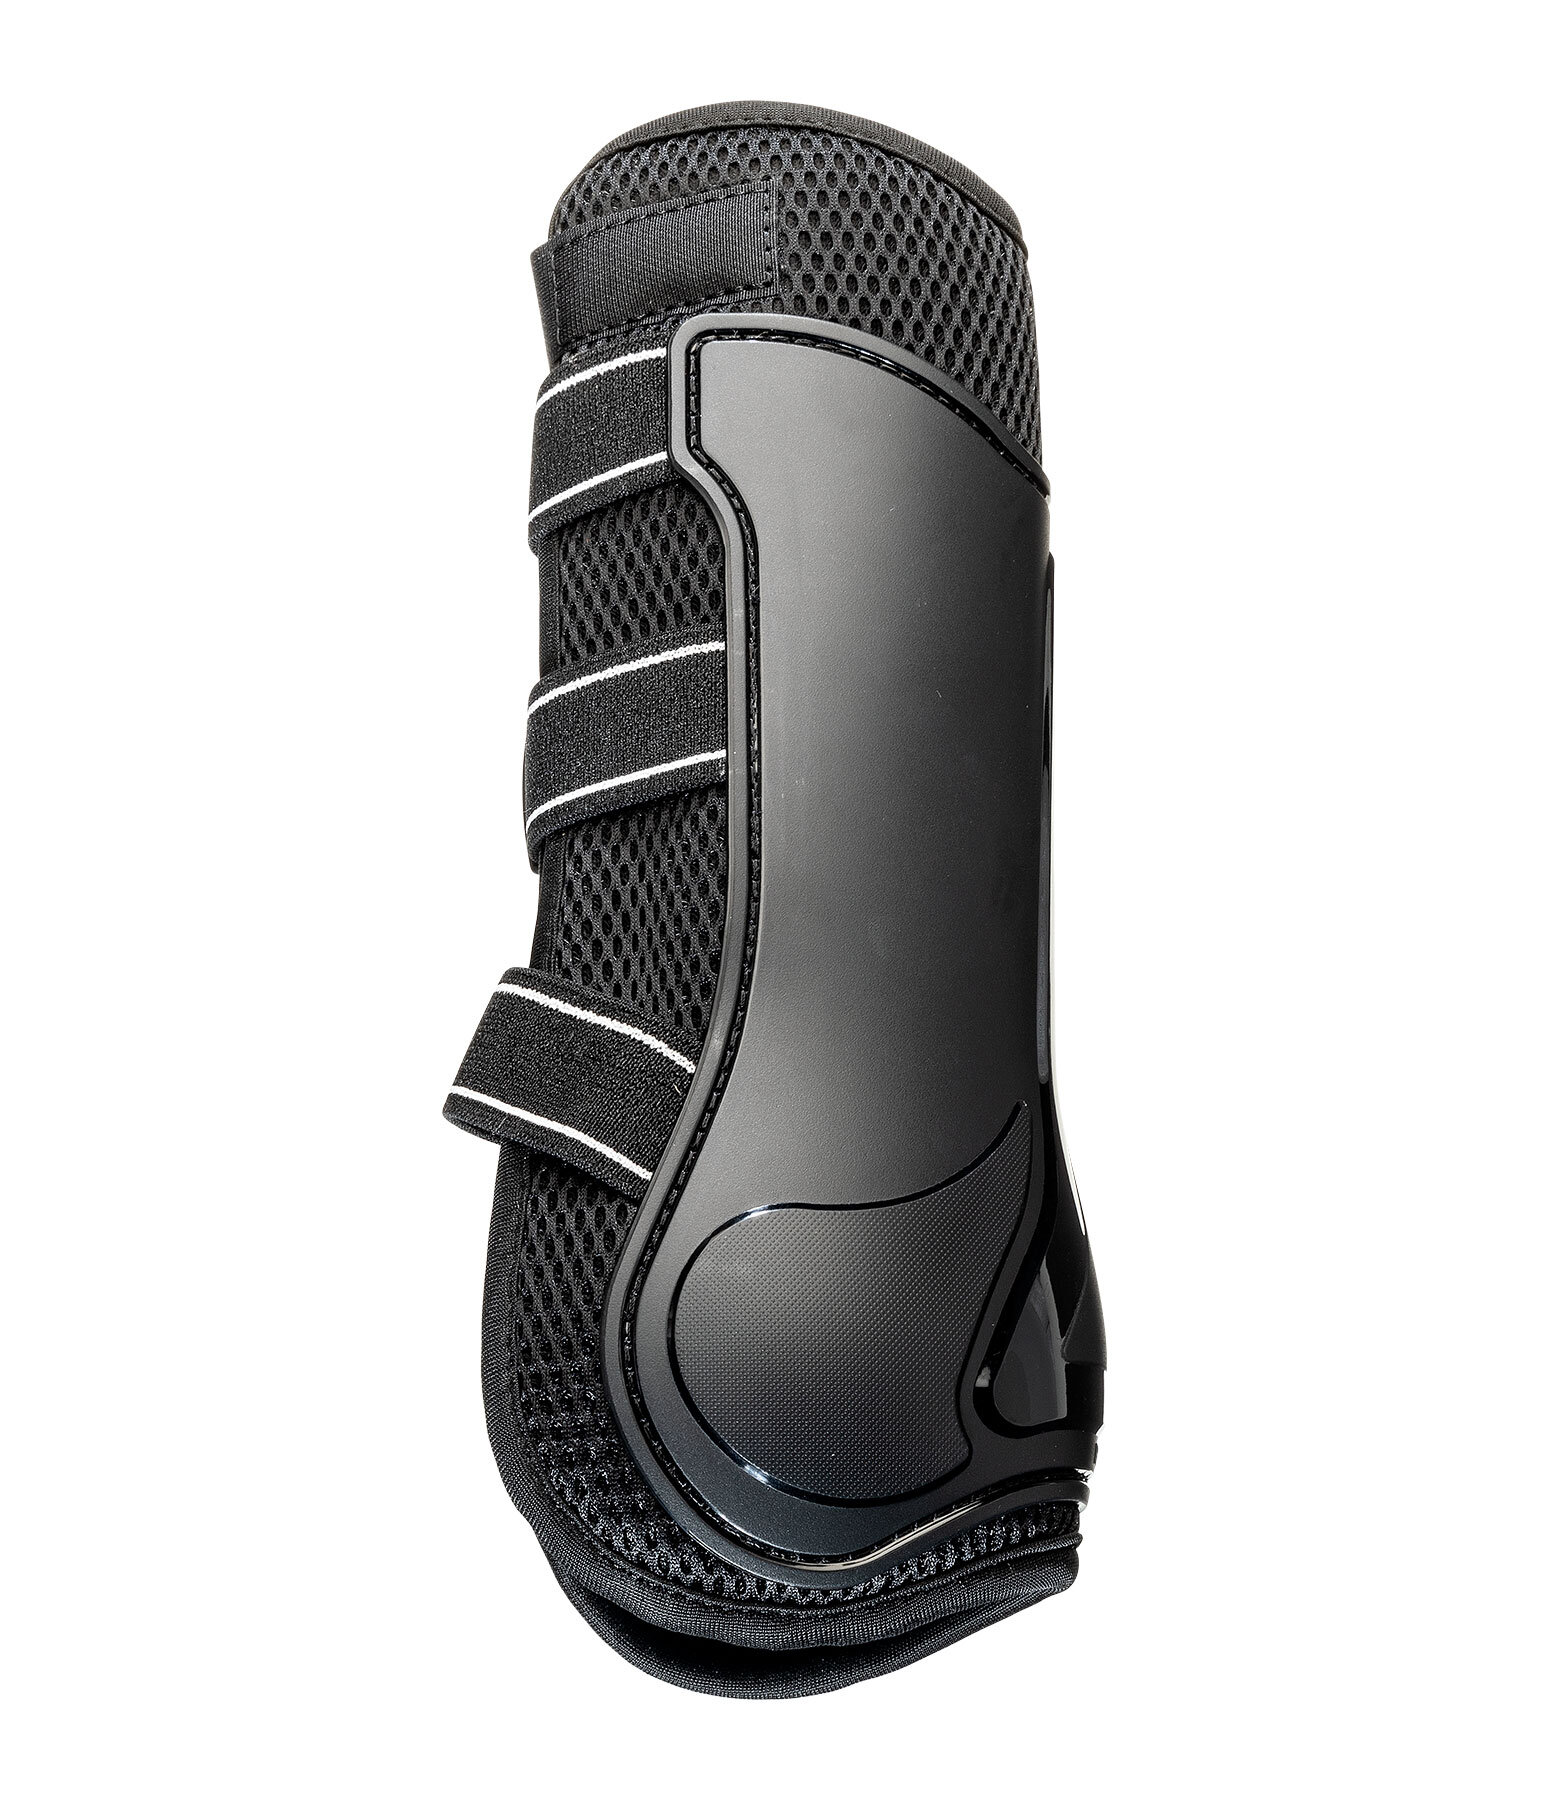 Boots Perfect Protection Air Mesh (hind legs)